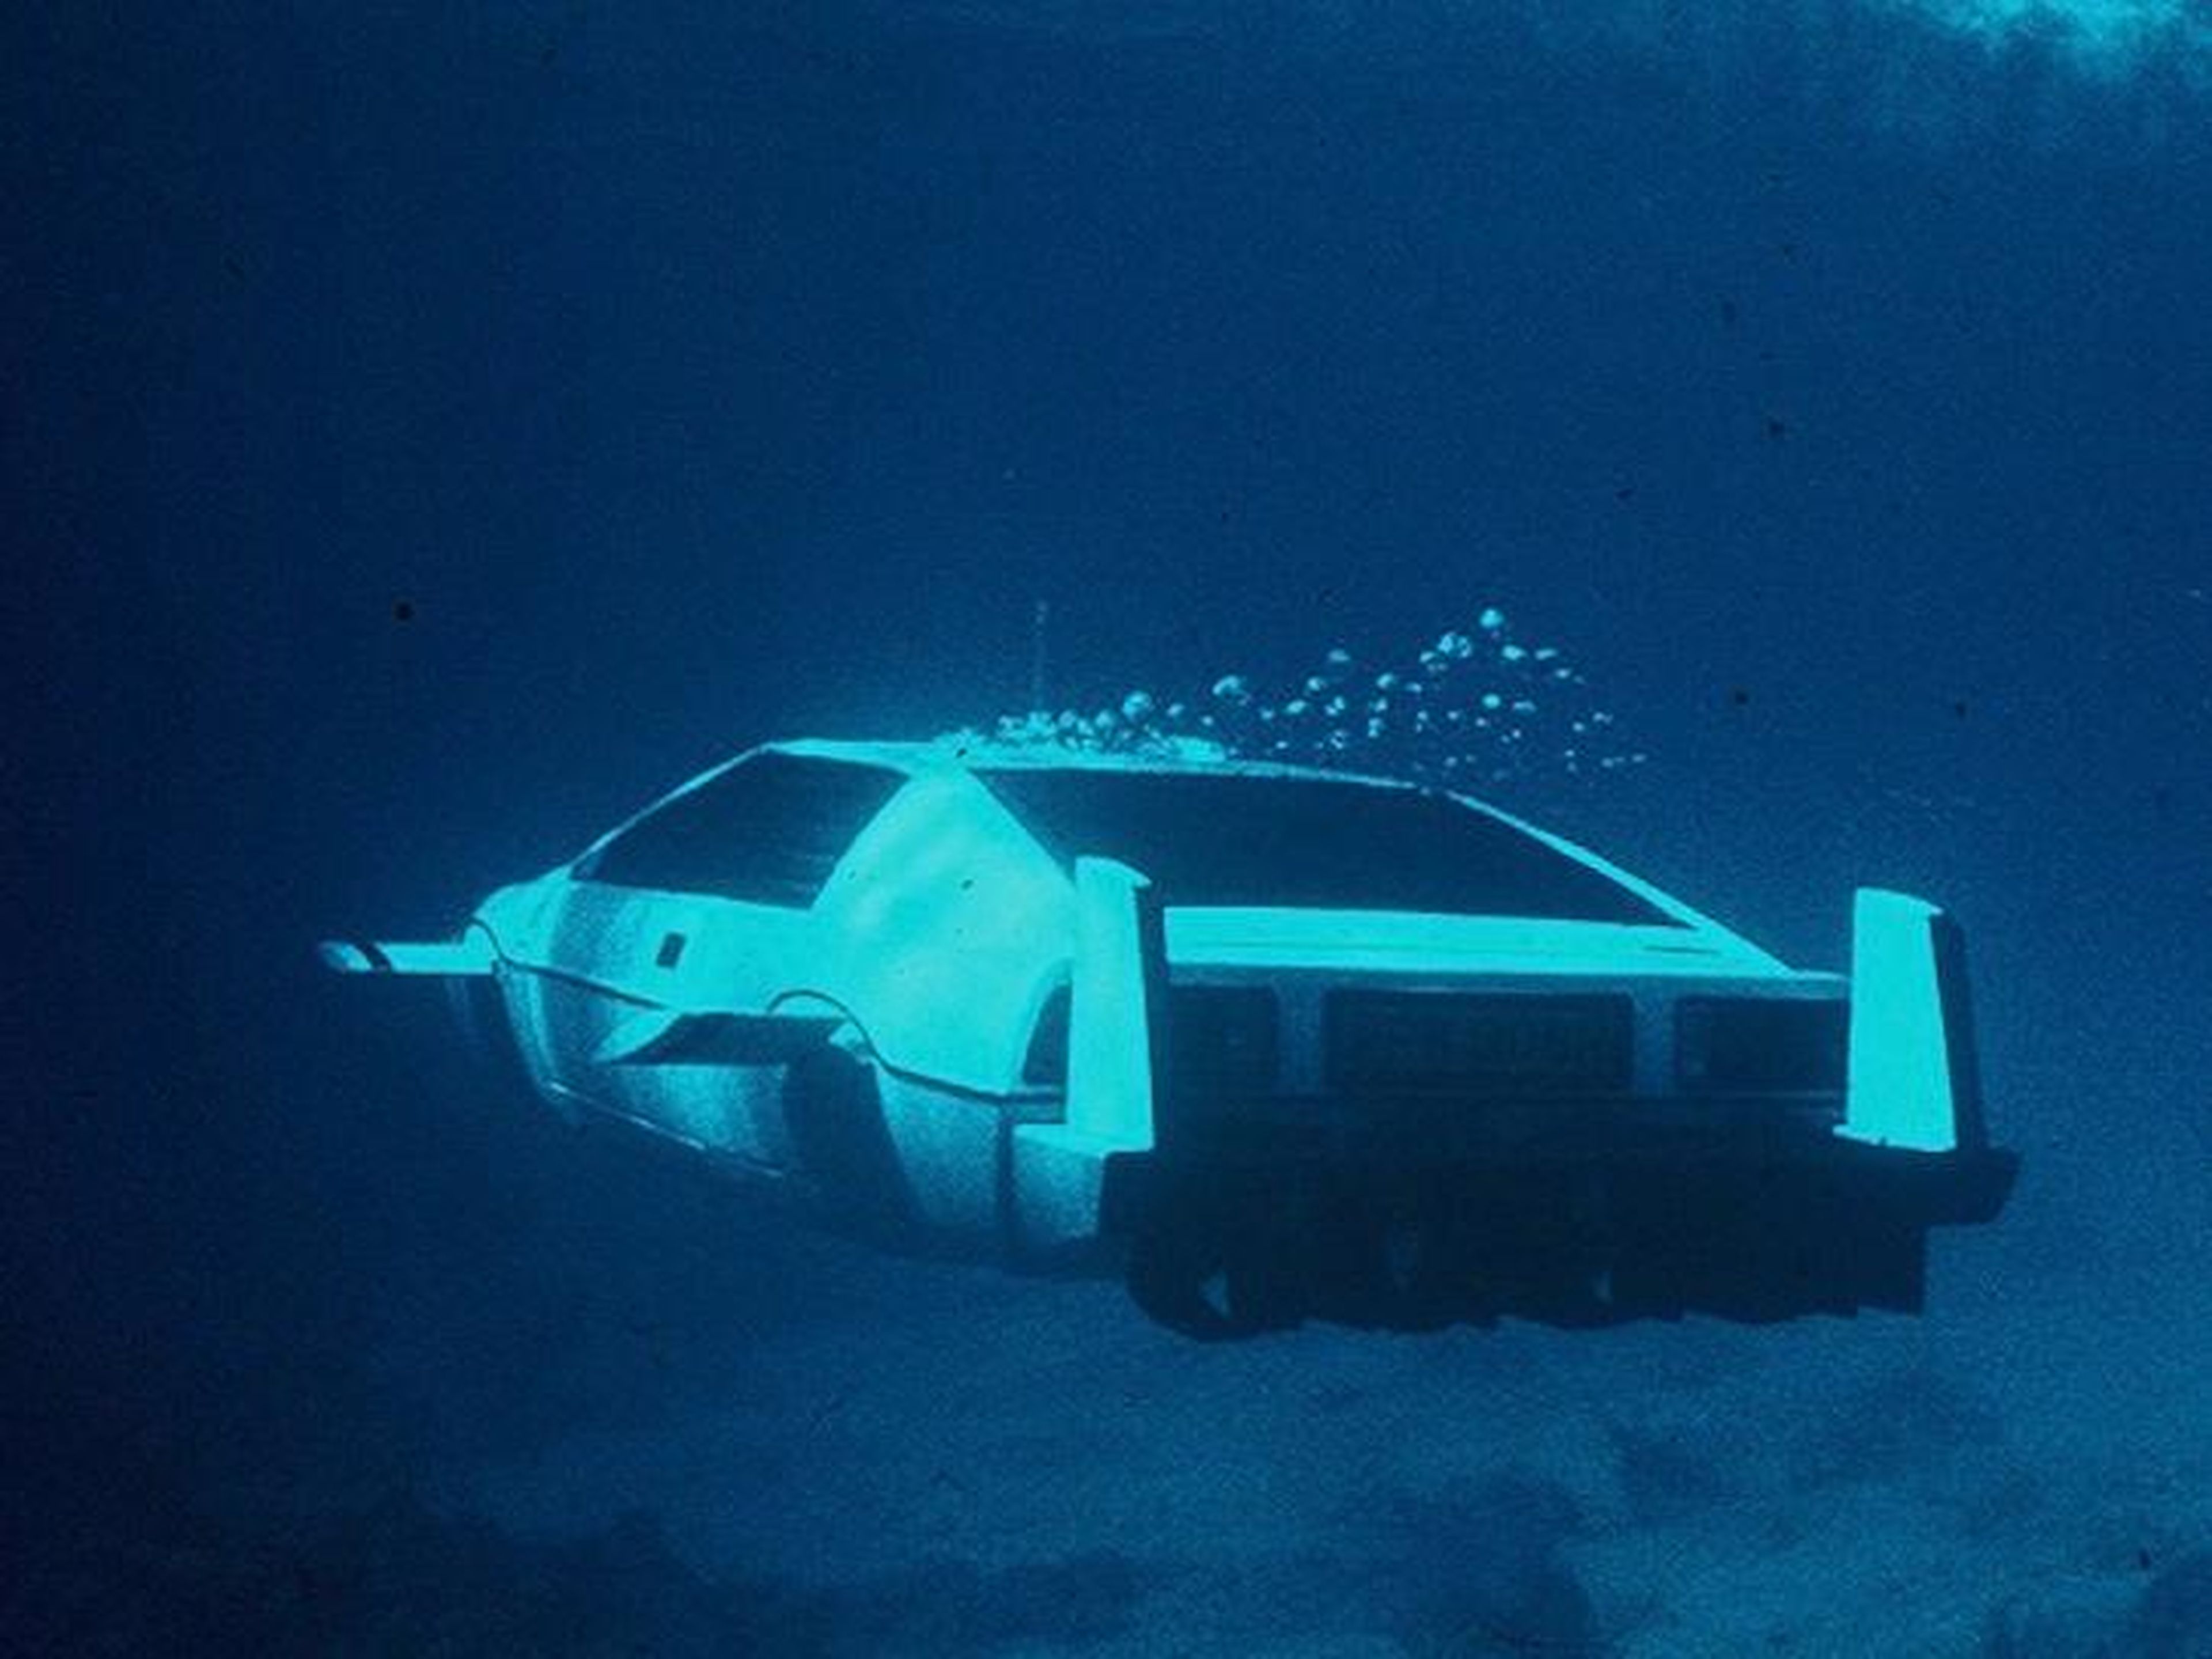 In the movie, the car turns into a submarine. "I was disappointed to learn that it can't actually transform. What I'm going to do is upgrade it with a Tesla electric powertrain and try to make it transform for real," Musk said.